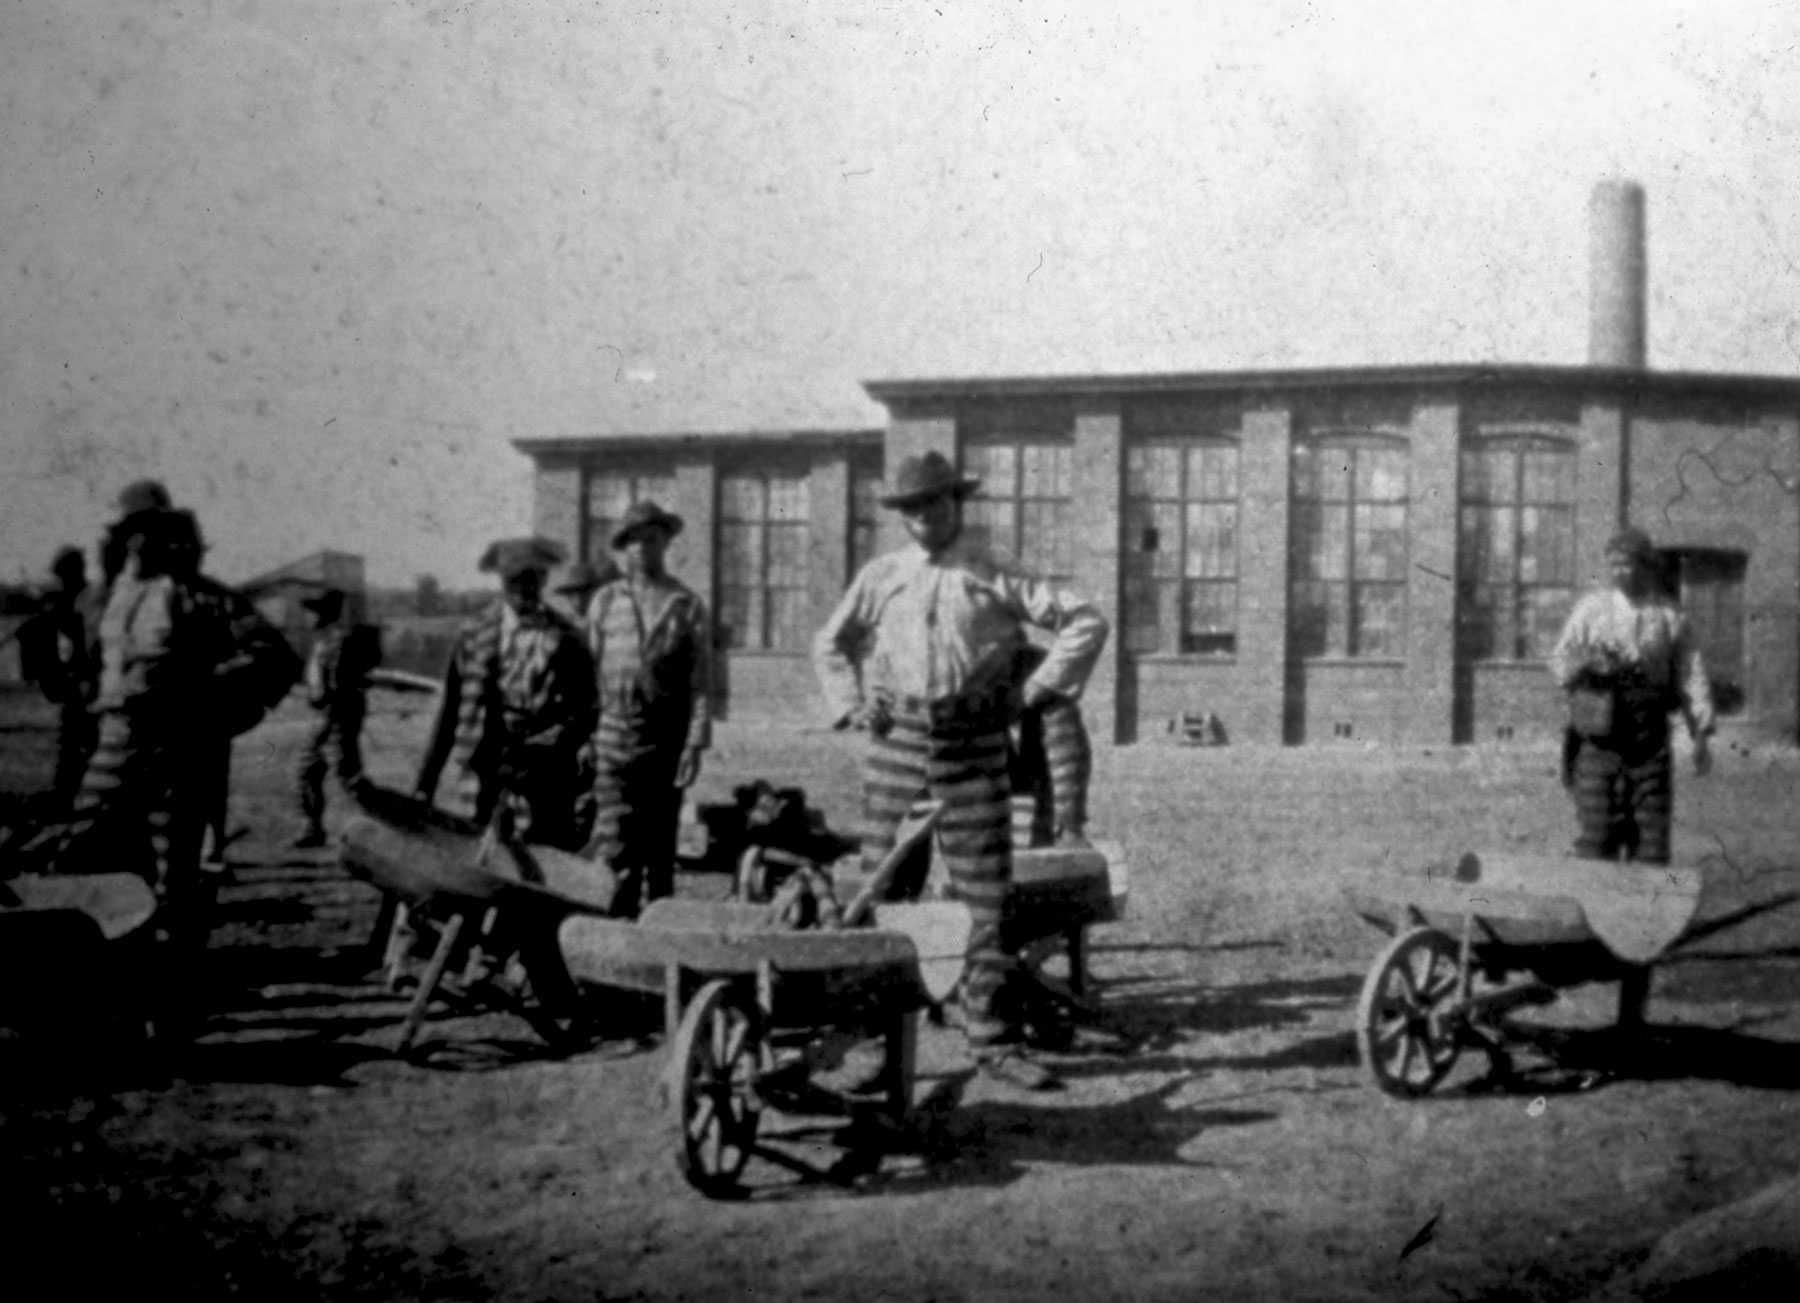 A blurry black and white photo of convicted workers standing with wheelbarrows in front of a factory.